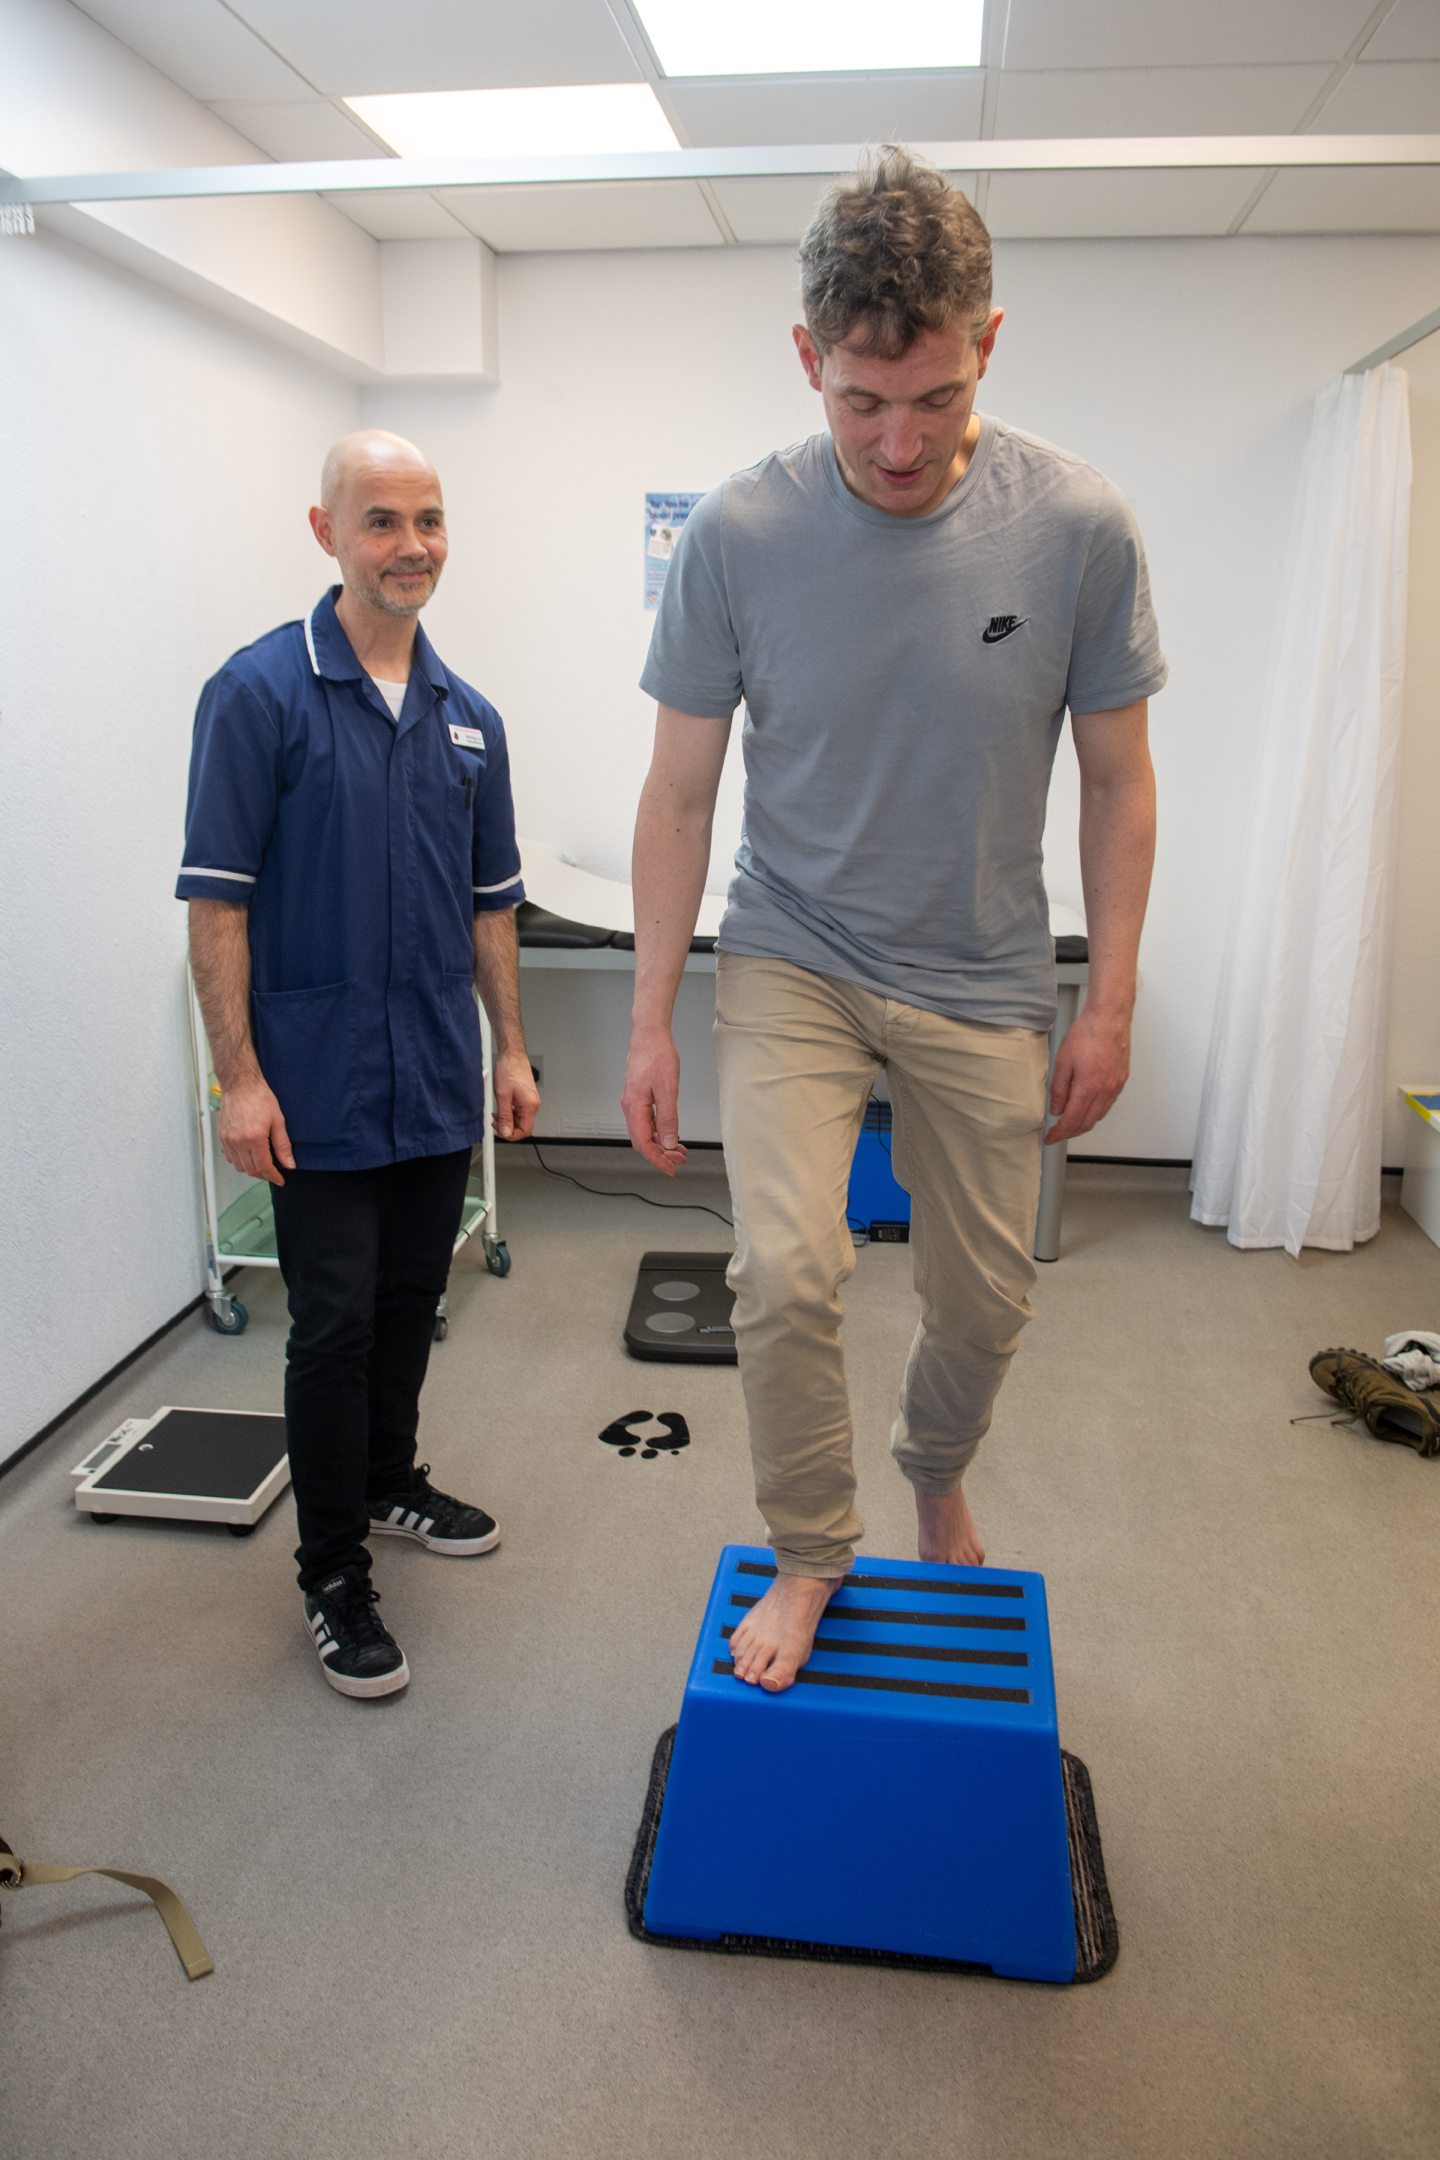 Andy Morton tackles the step test as IMM nurse David Macleod looks on